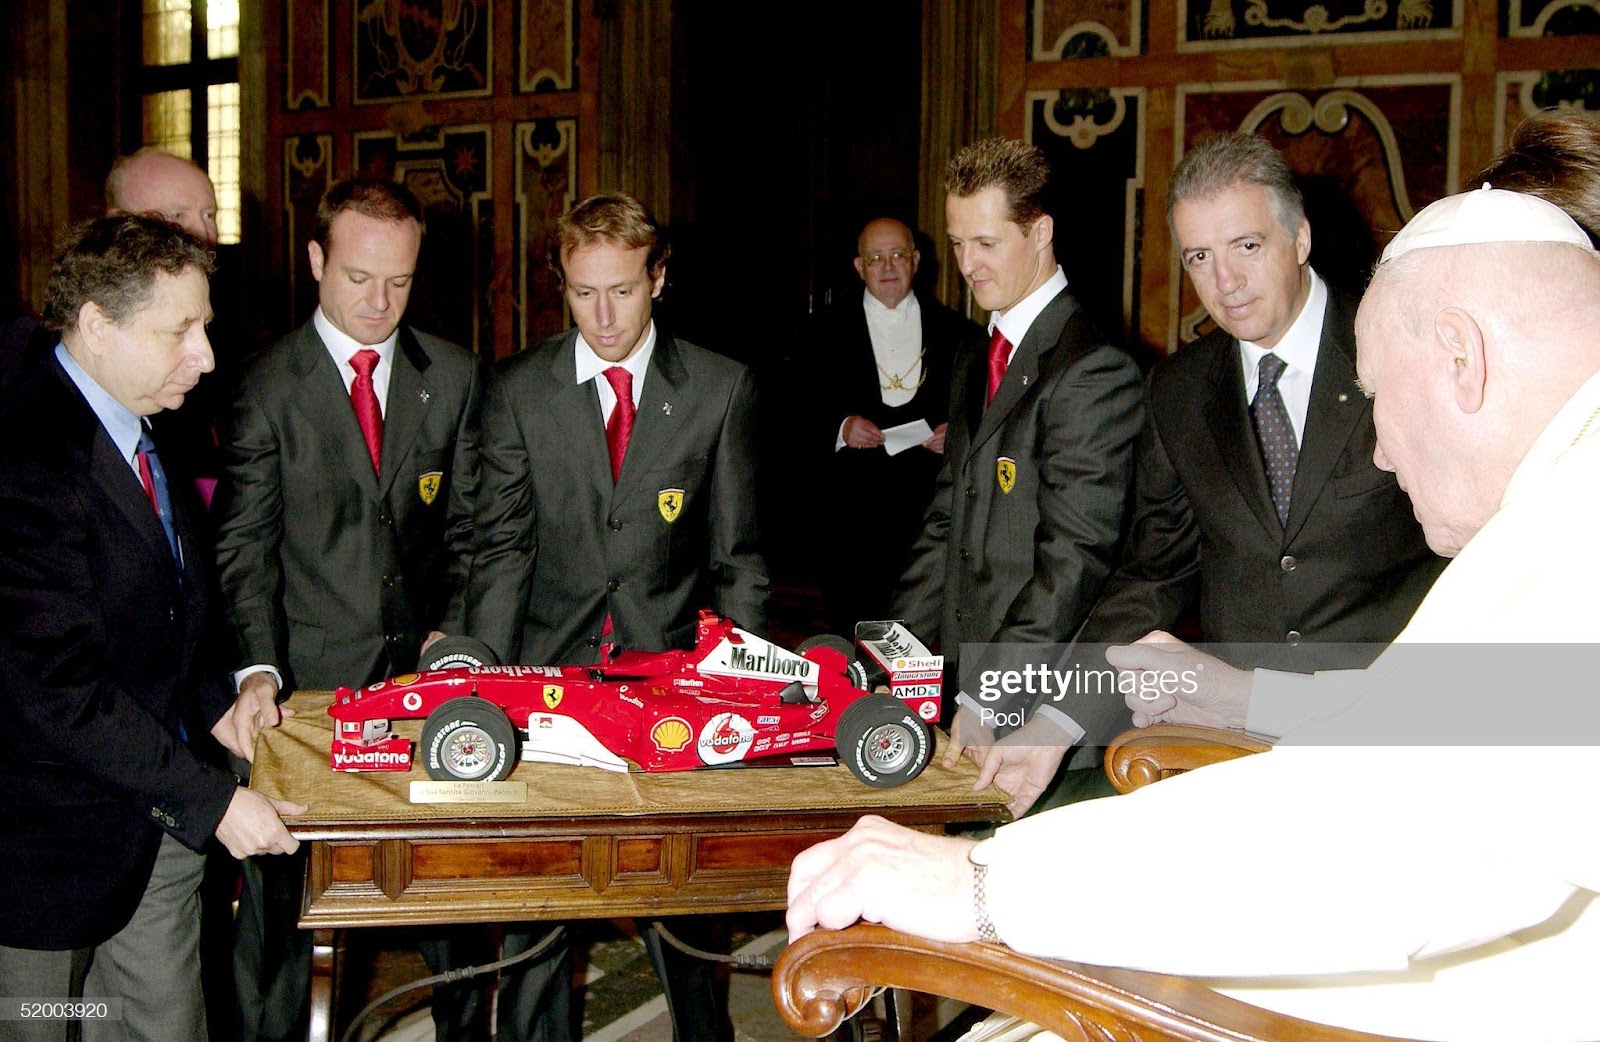 Pope John Paul II receives as a gift from Ferrari President Luca Cordero di Montezemolo, Michael Schumacher, Brazilian teammate Rubens Barrichello, Ferrari managing director, F1 team boss Jean Todt and mechanics a 1:5 scale model of the car that won Ferrari both the championship and constructor title in 2004 during a meeting at the Clementina Hall, January 17, 2005, in Vatican City. 